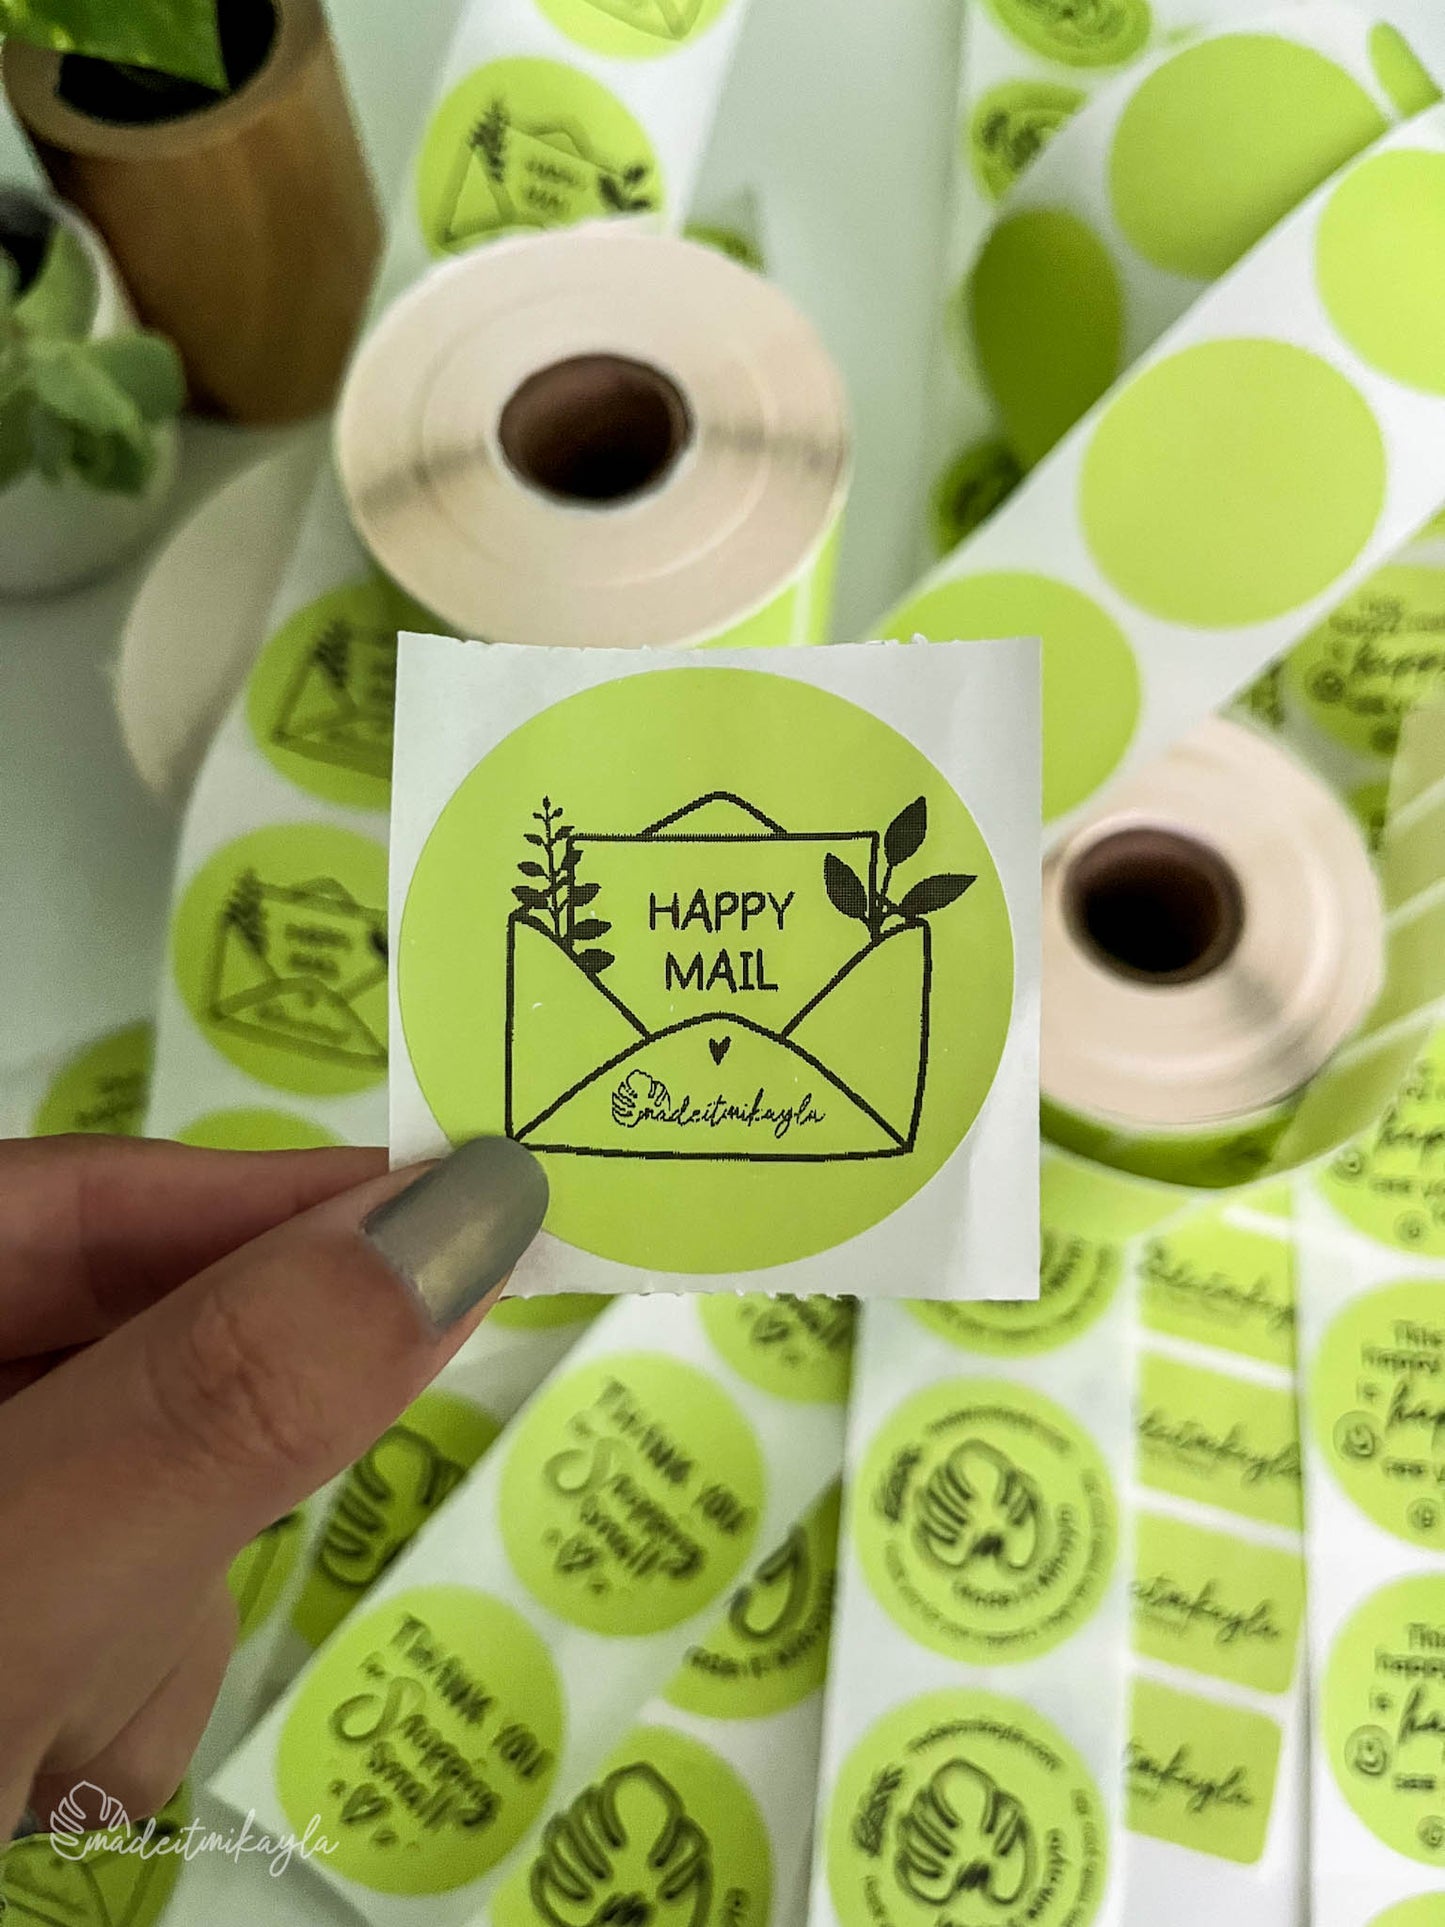 Happy Mail Packaging Stickers